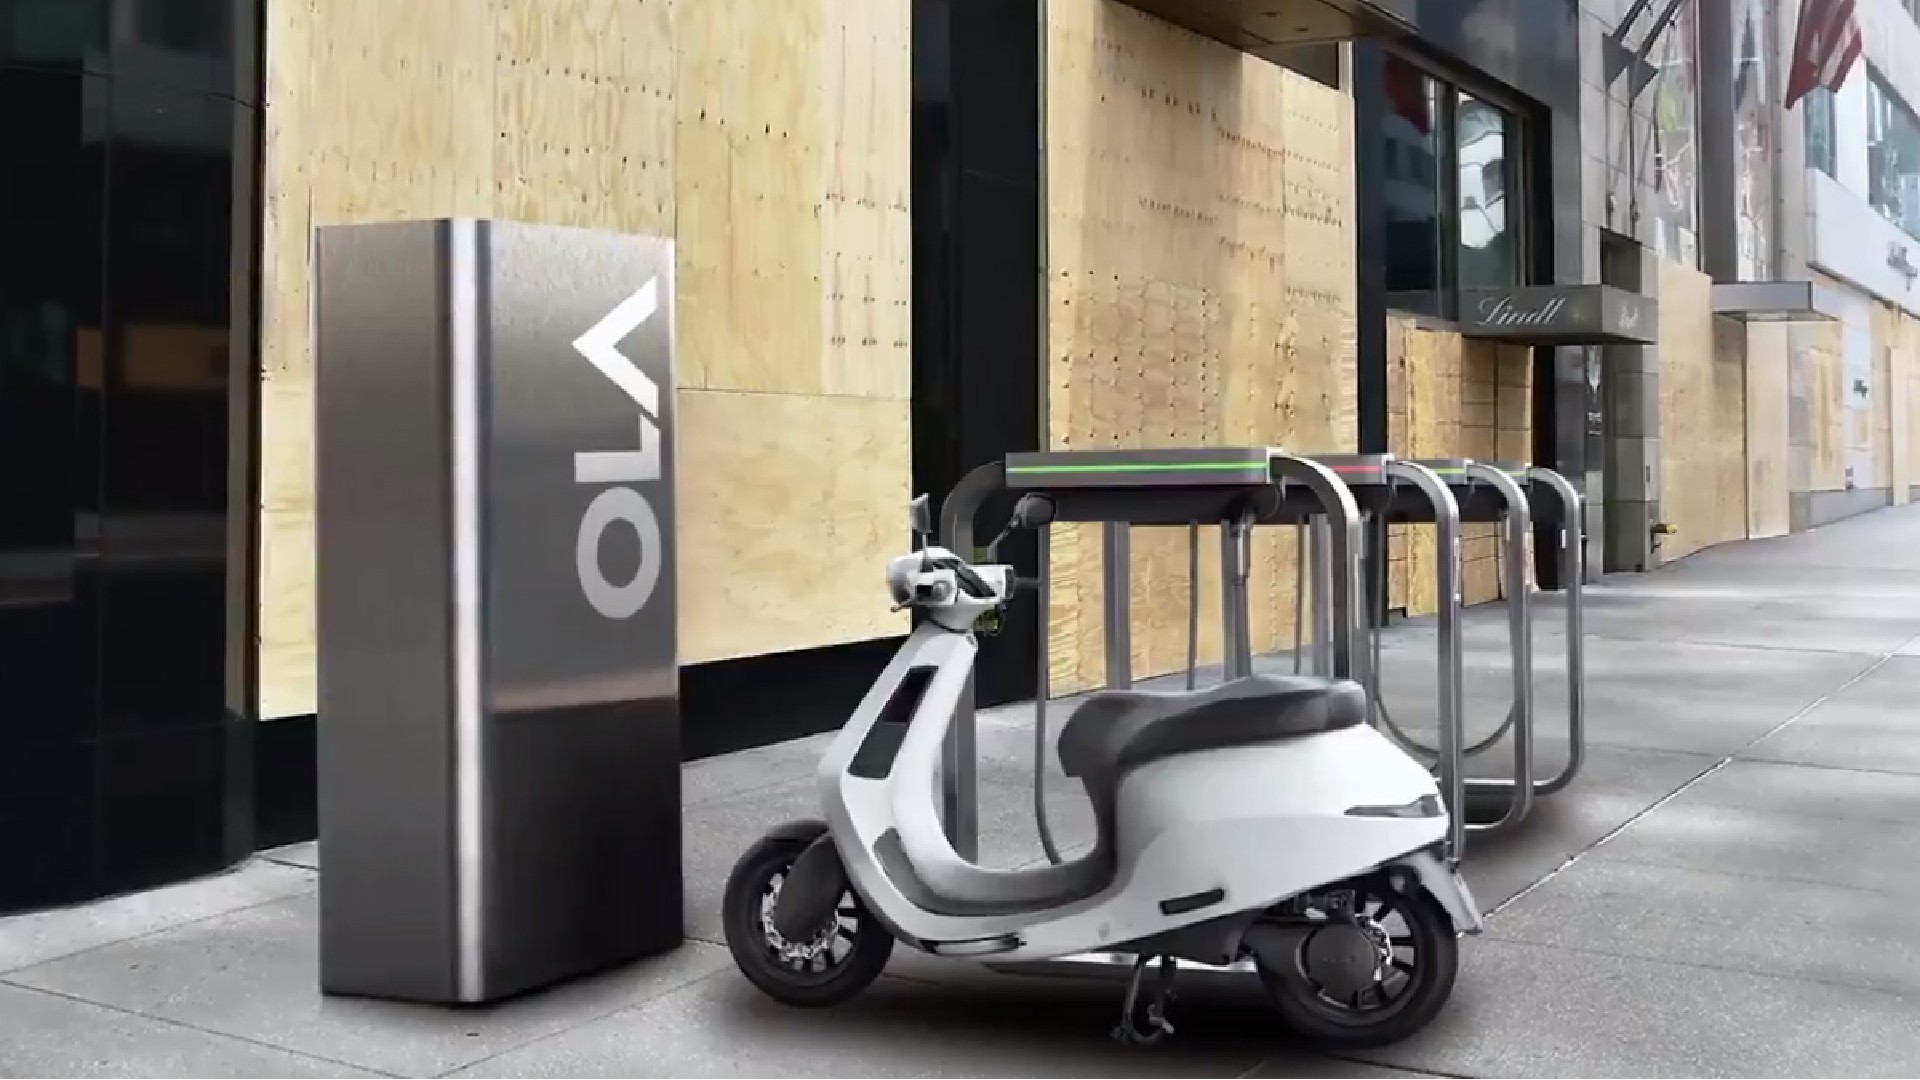 Ola Will Set Up Electric Charging Points Costing Rs 3500 Across Malls, Shops, Apartments, Homes